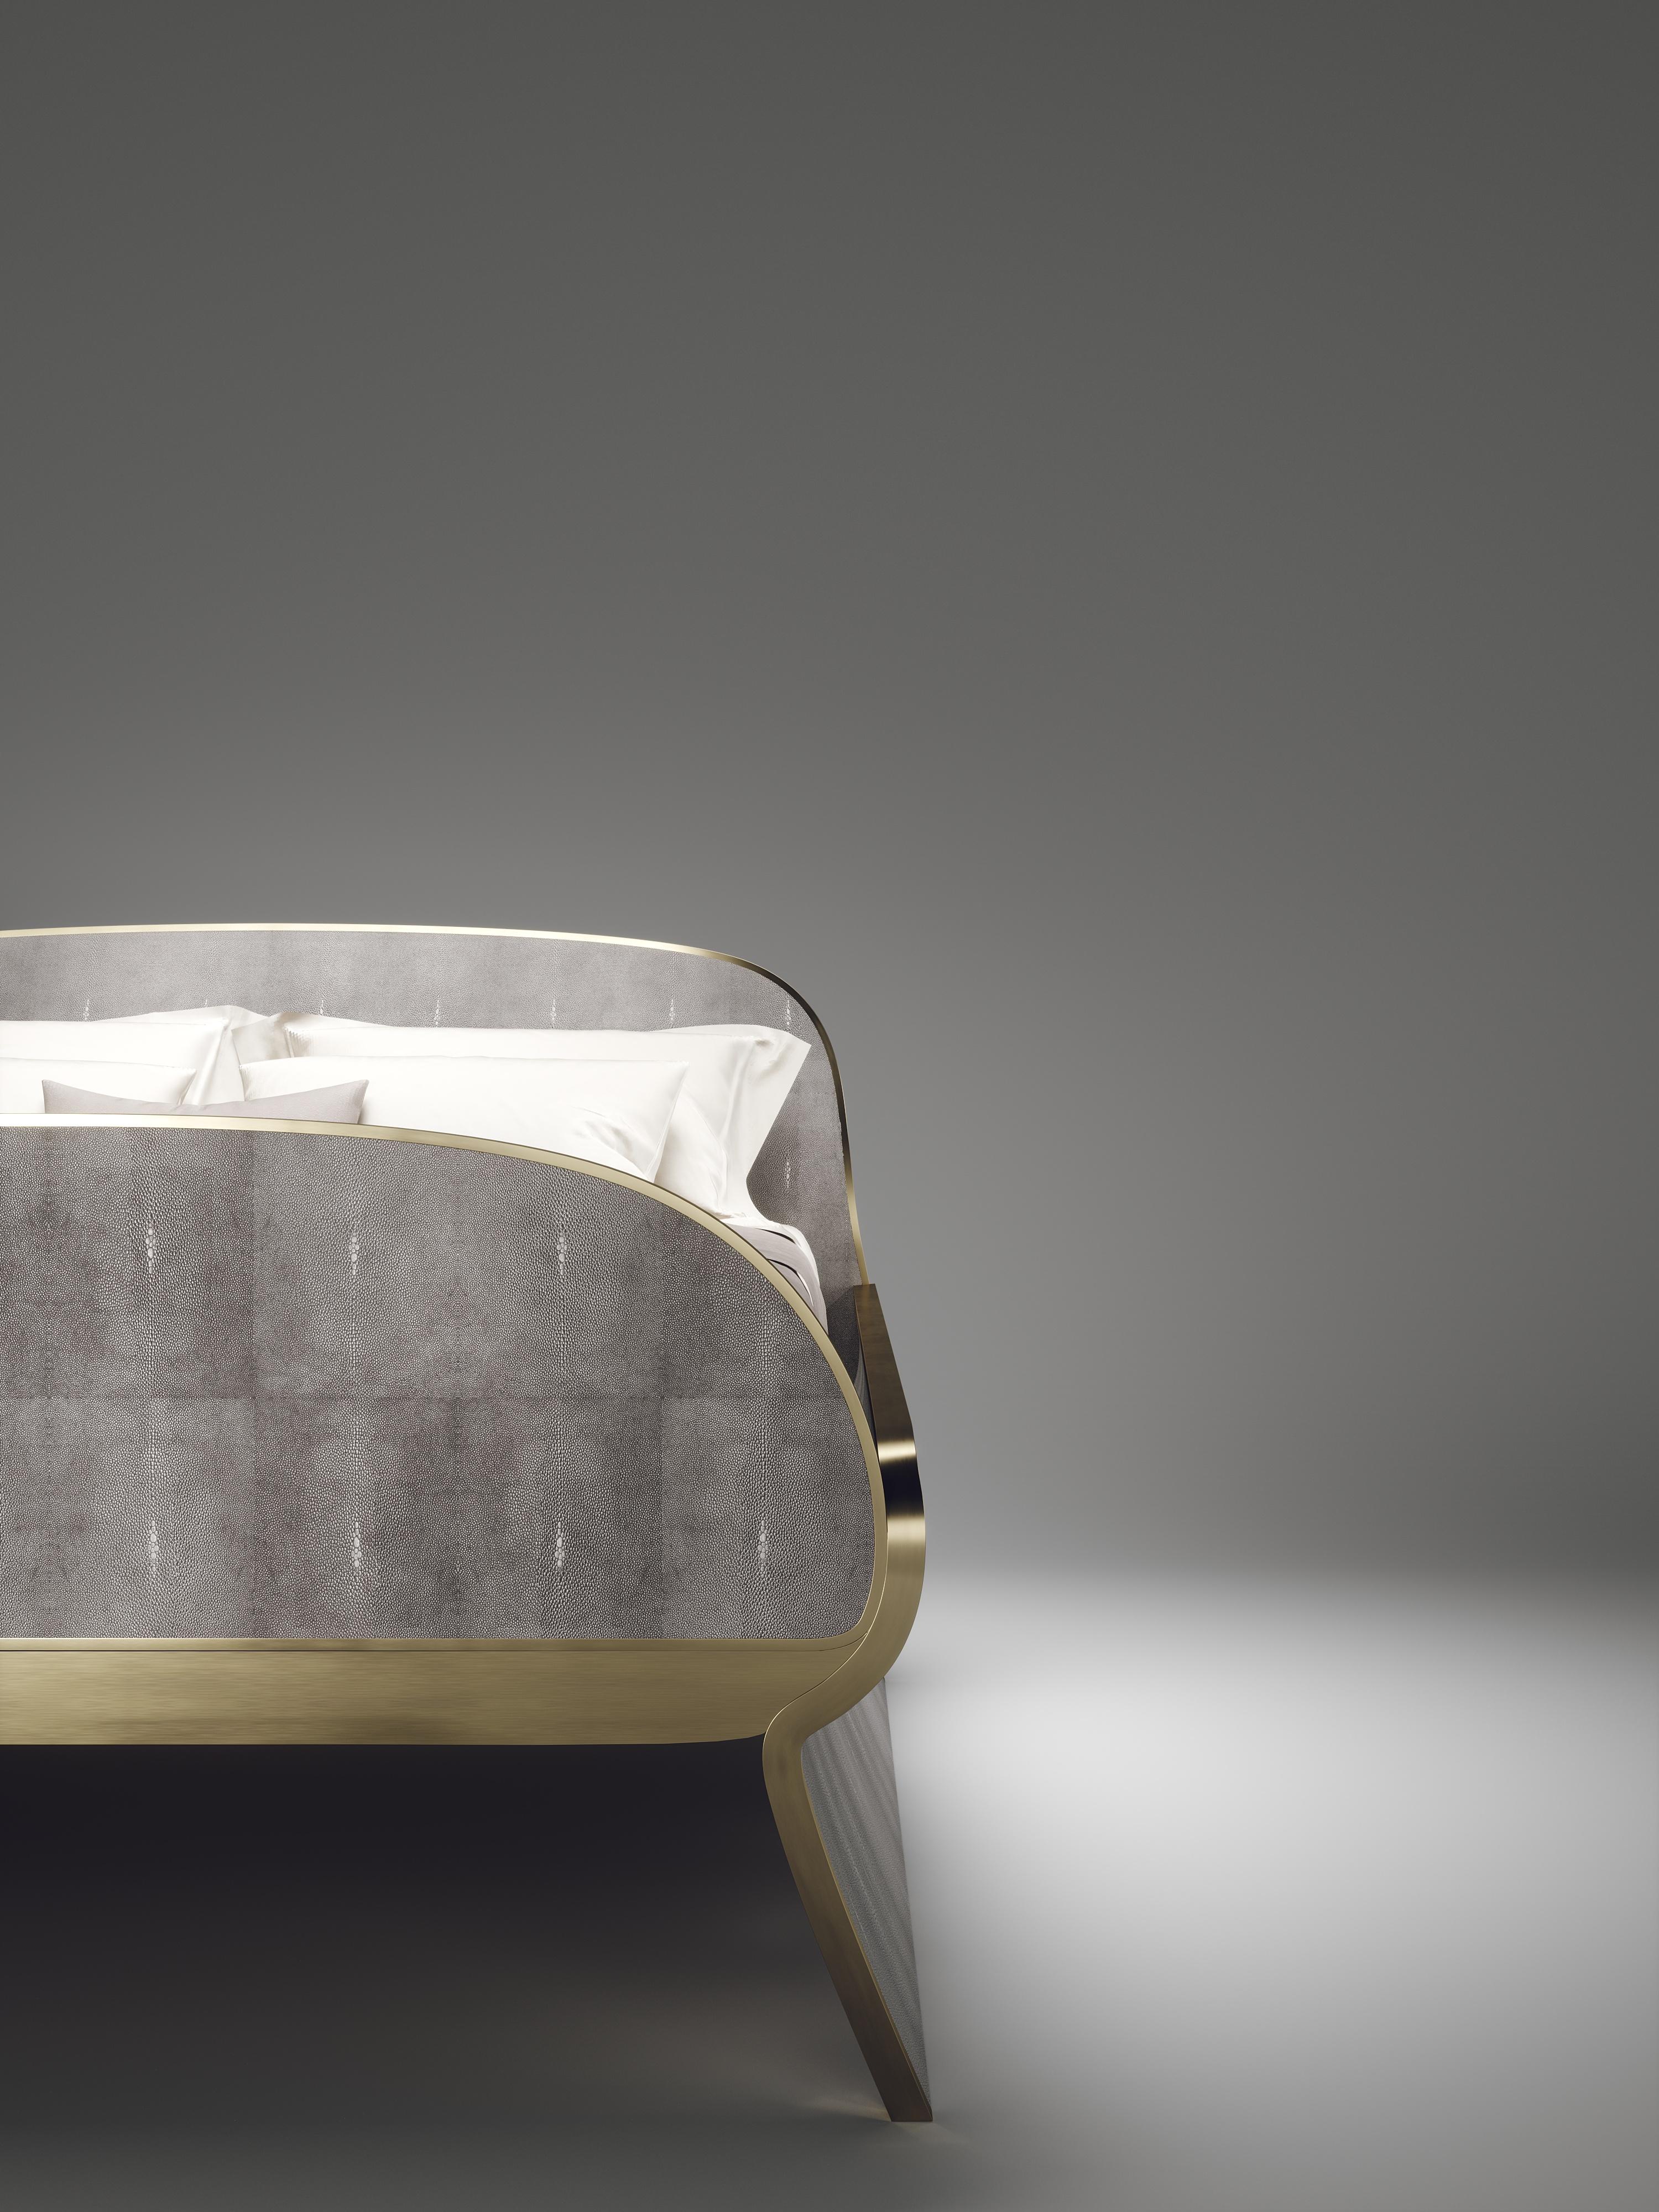 The Dandy bed inlaid in light grey shagreen and bronze-patina brass is a one of a kind piece. This modern and elegant design creates a subtle and sculptural statement for any bedroom. This design comes in other finishes as shown in the image slides.